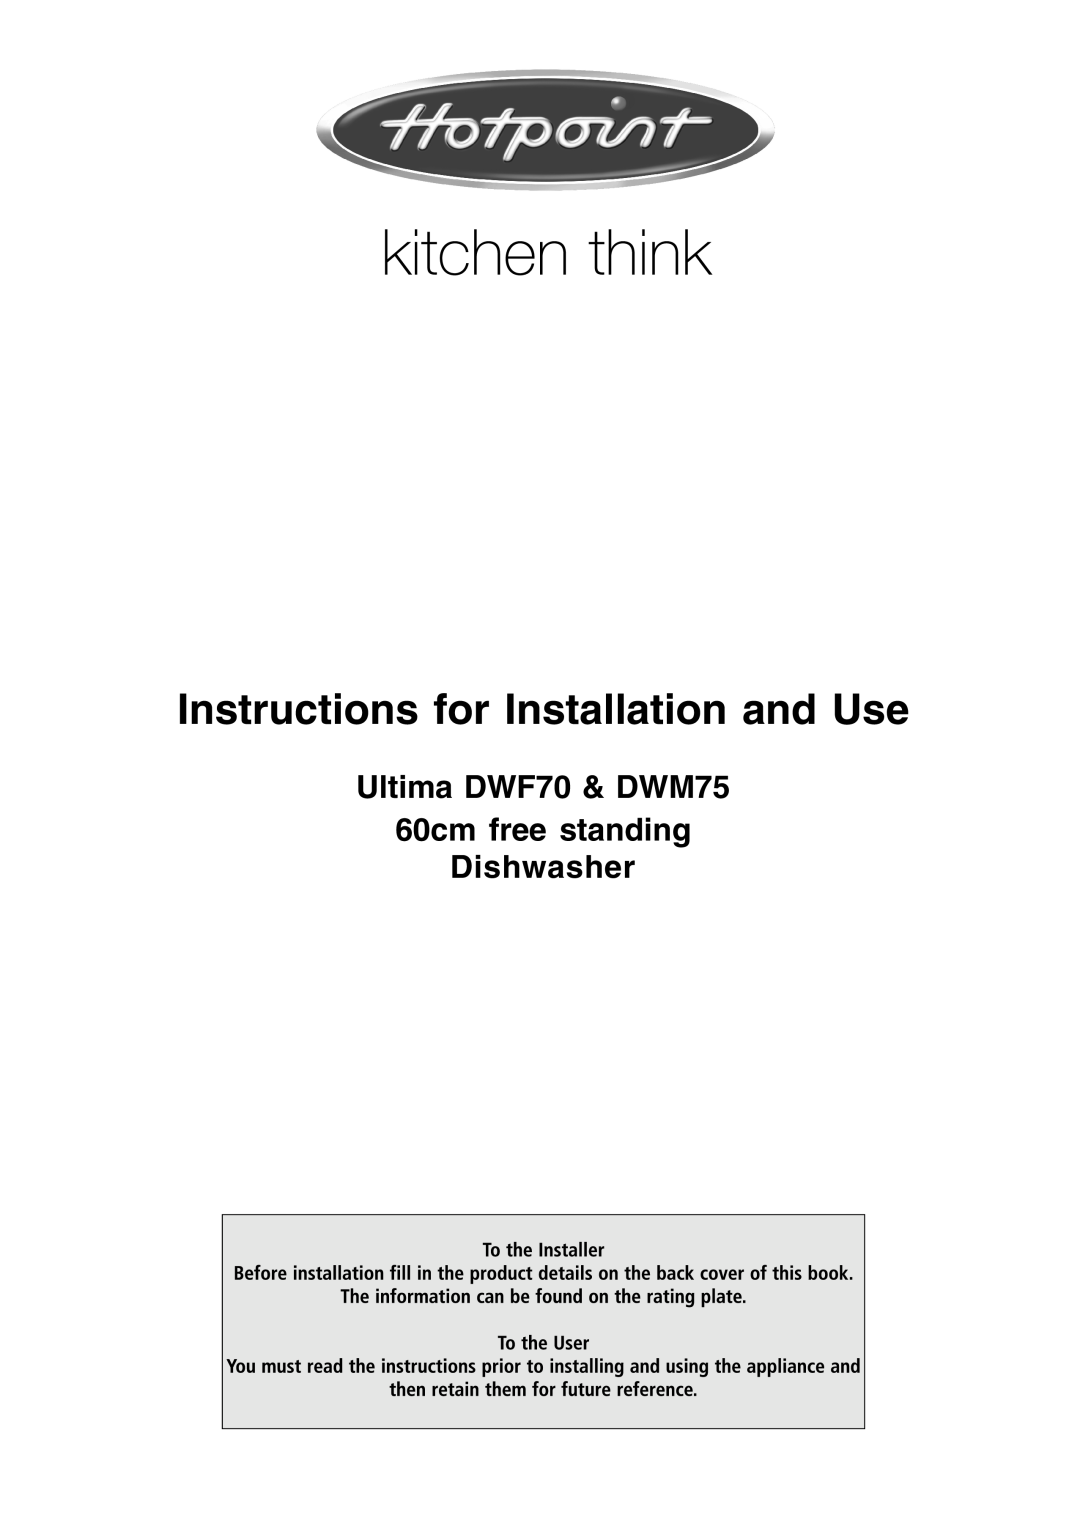 Hotpoint manual Instructions for Installation and Use, Ultima DWF70 & DWM75 60cm free standing Dishwasher 